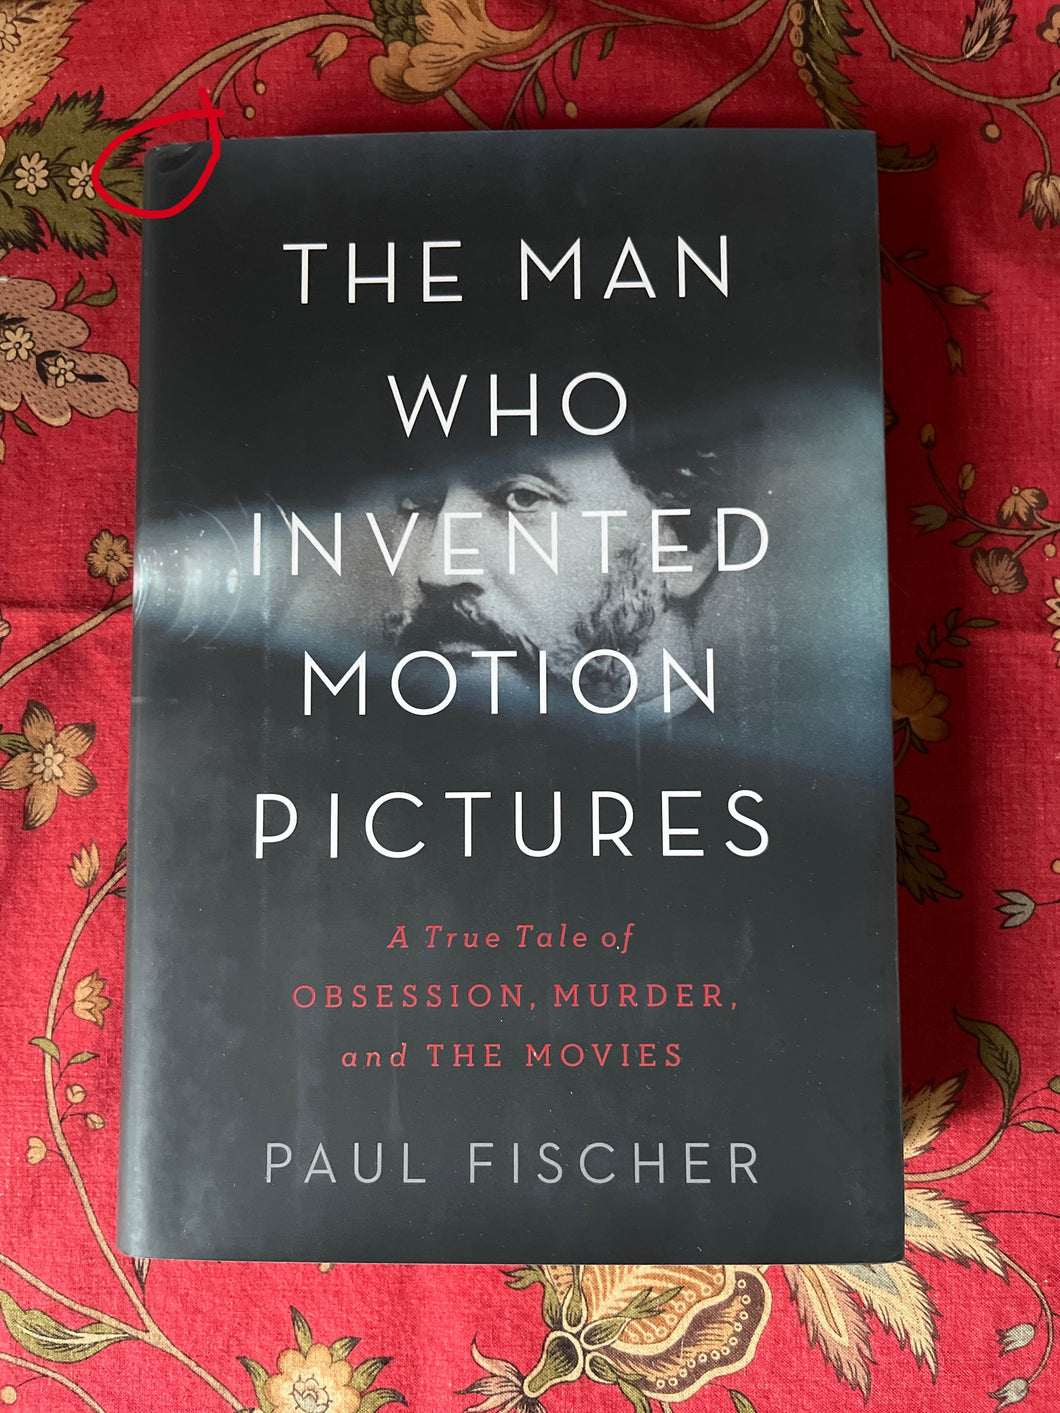 The Man Who Invented Motion Pictures: A True Tale of Obsession, Murder, and The Movies